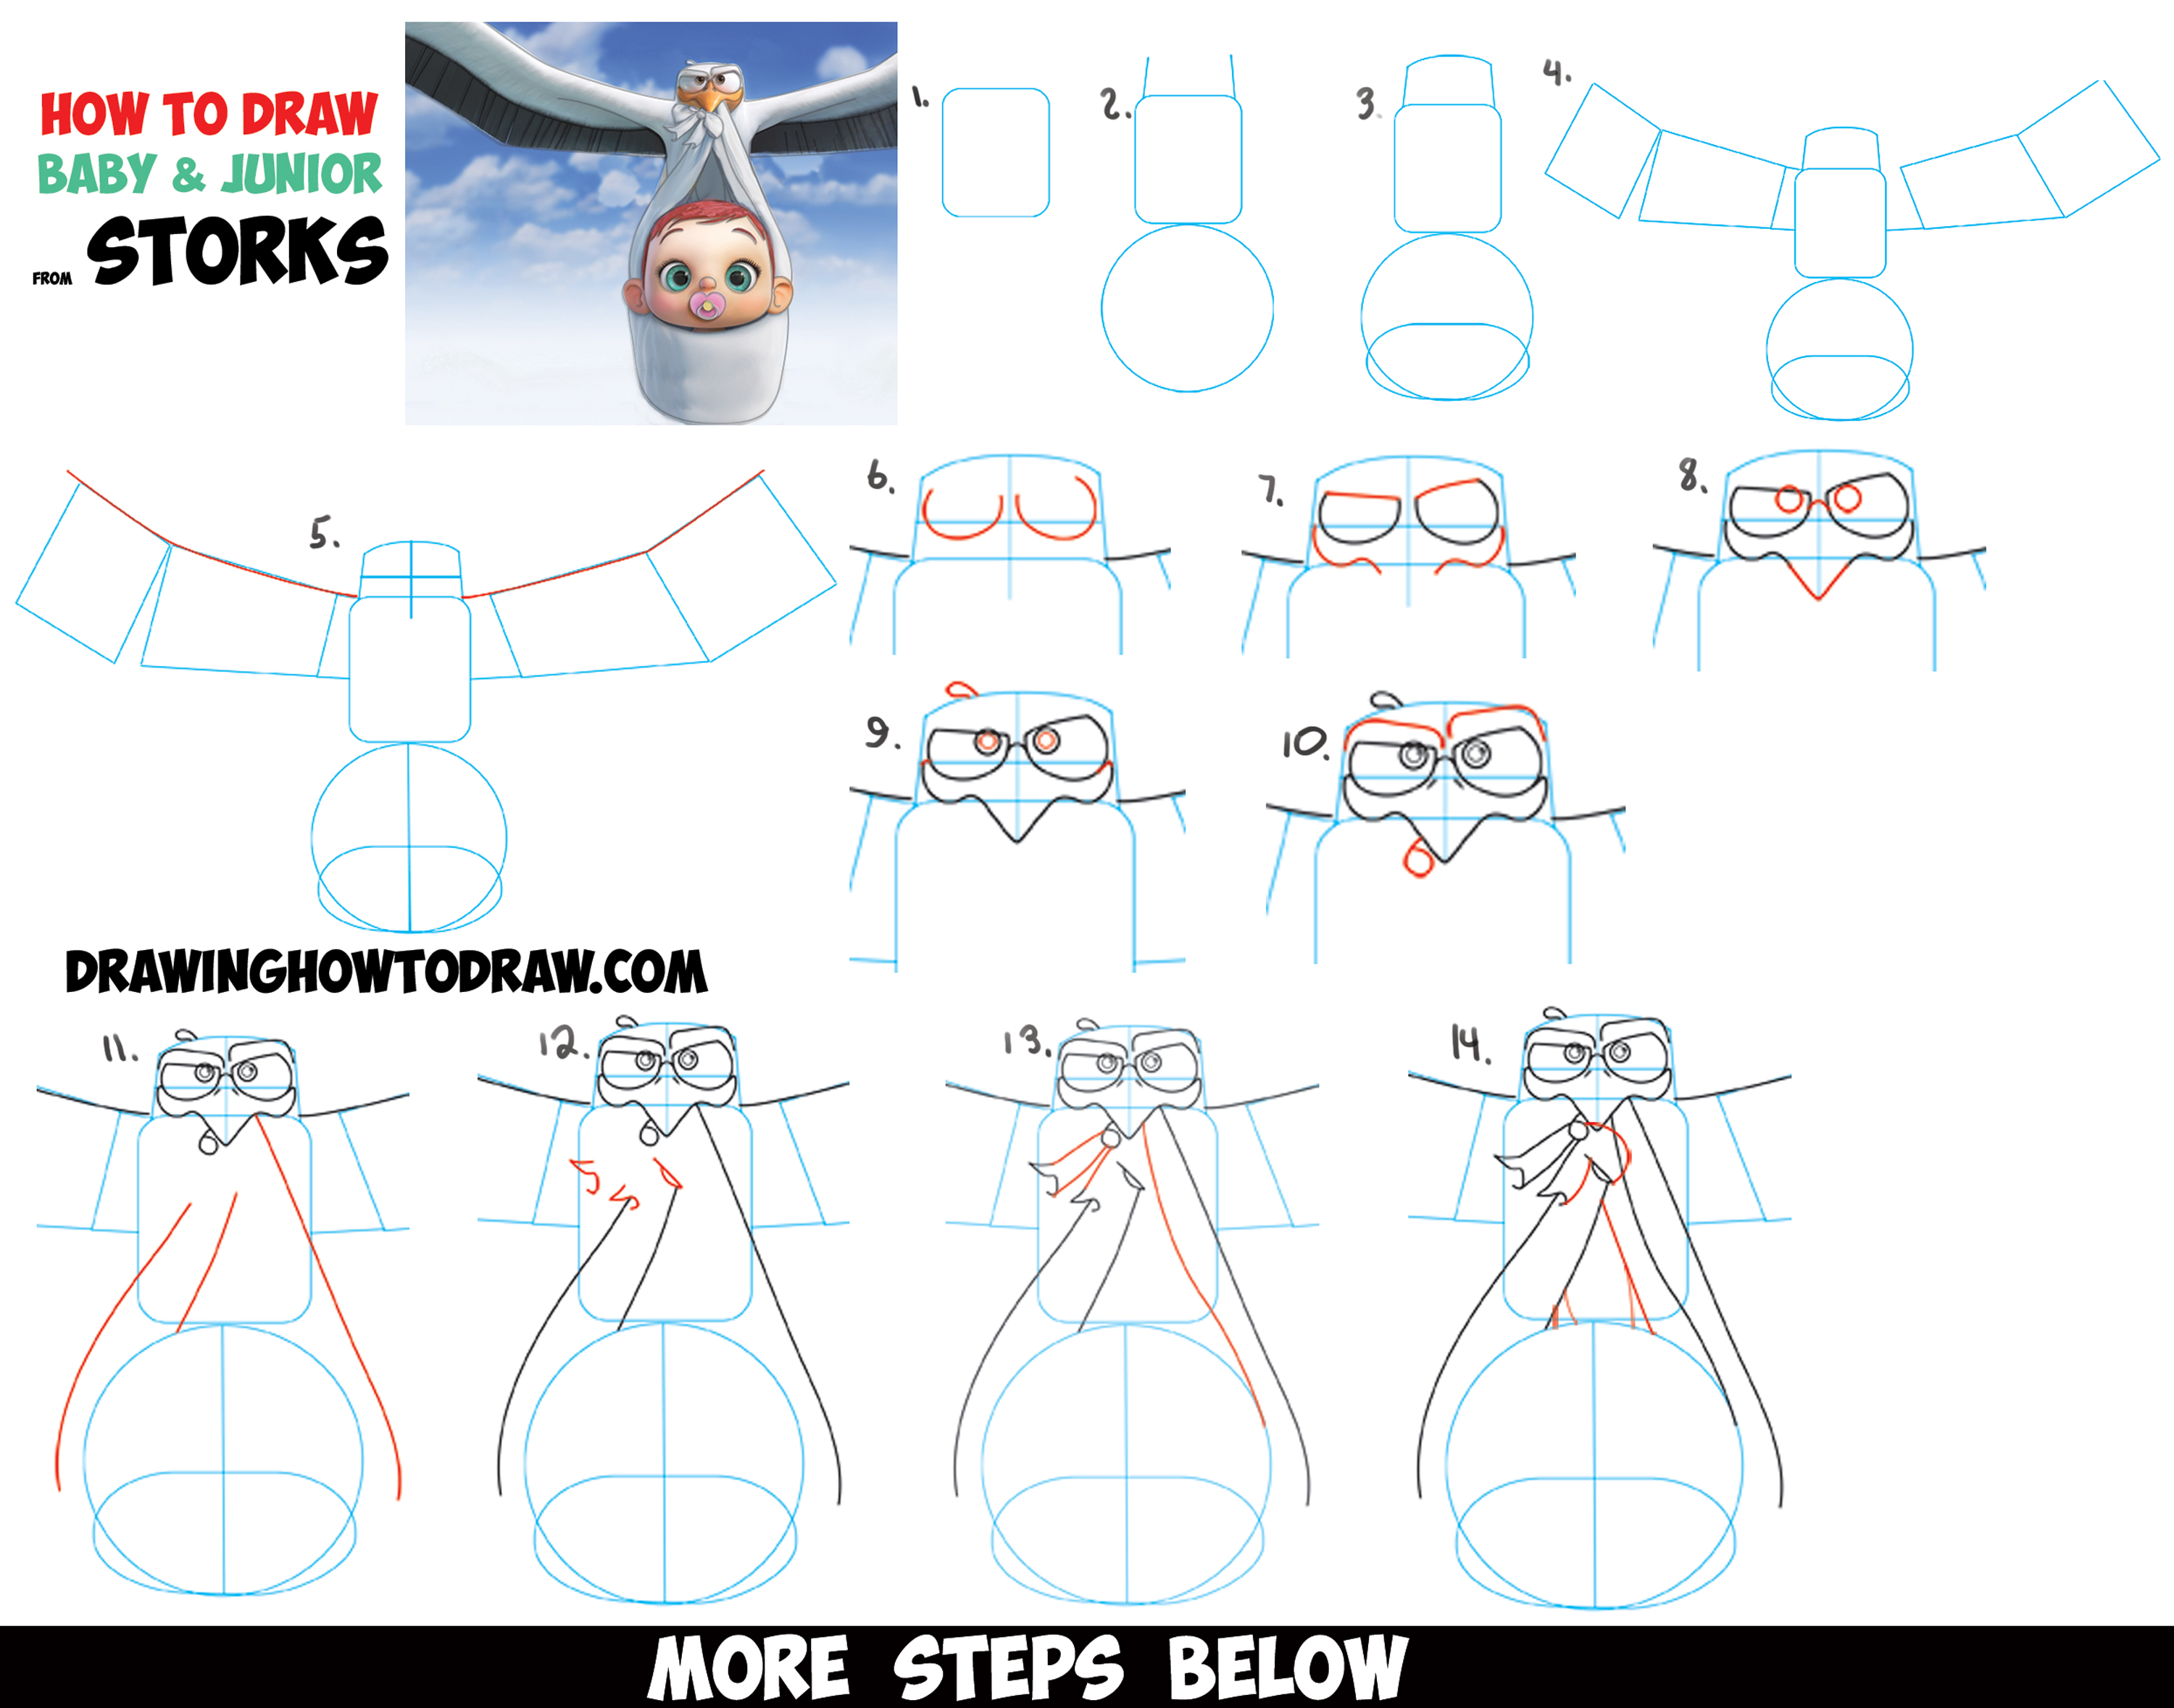 How to Draw The Baby and the Stork Junior from Storks, the Movie - Easy Step by Step Drawing Tutorial